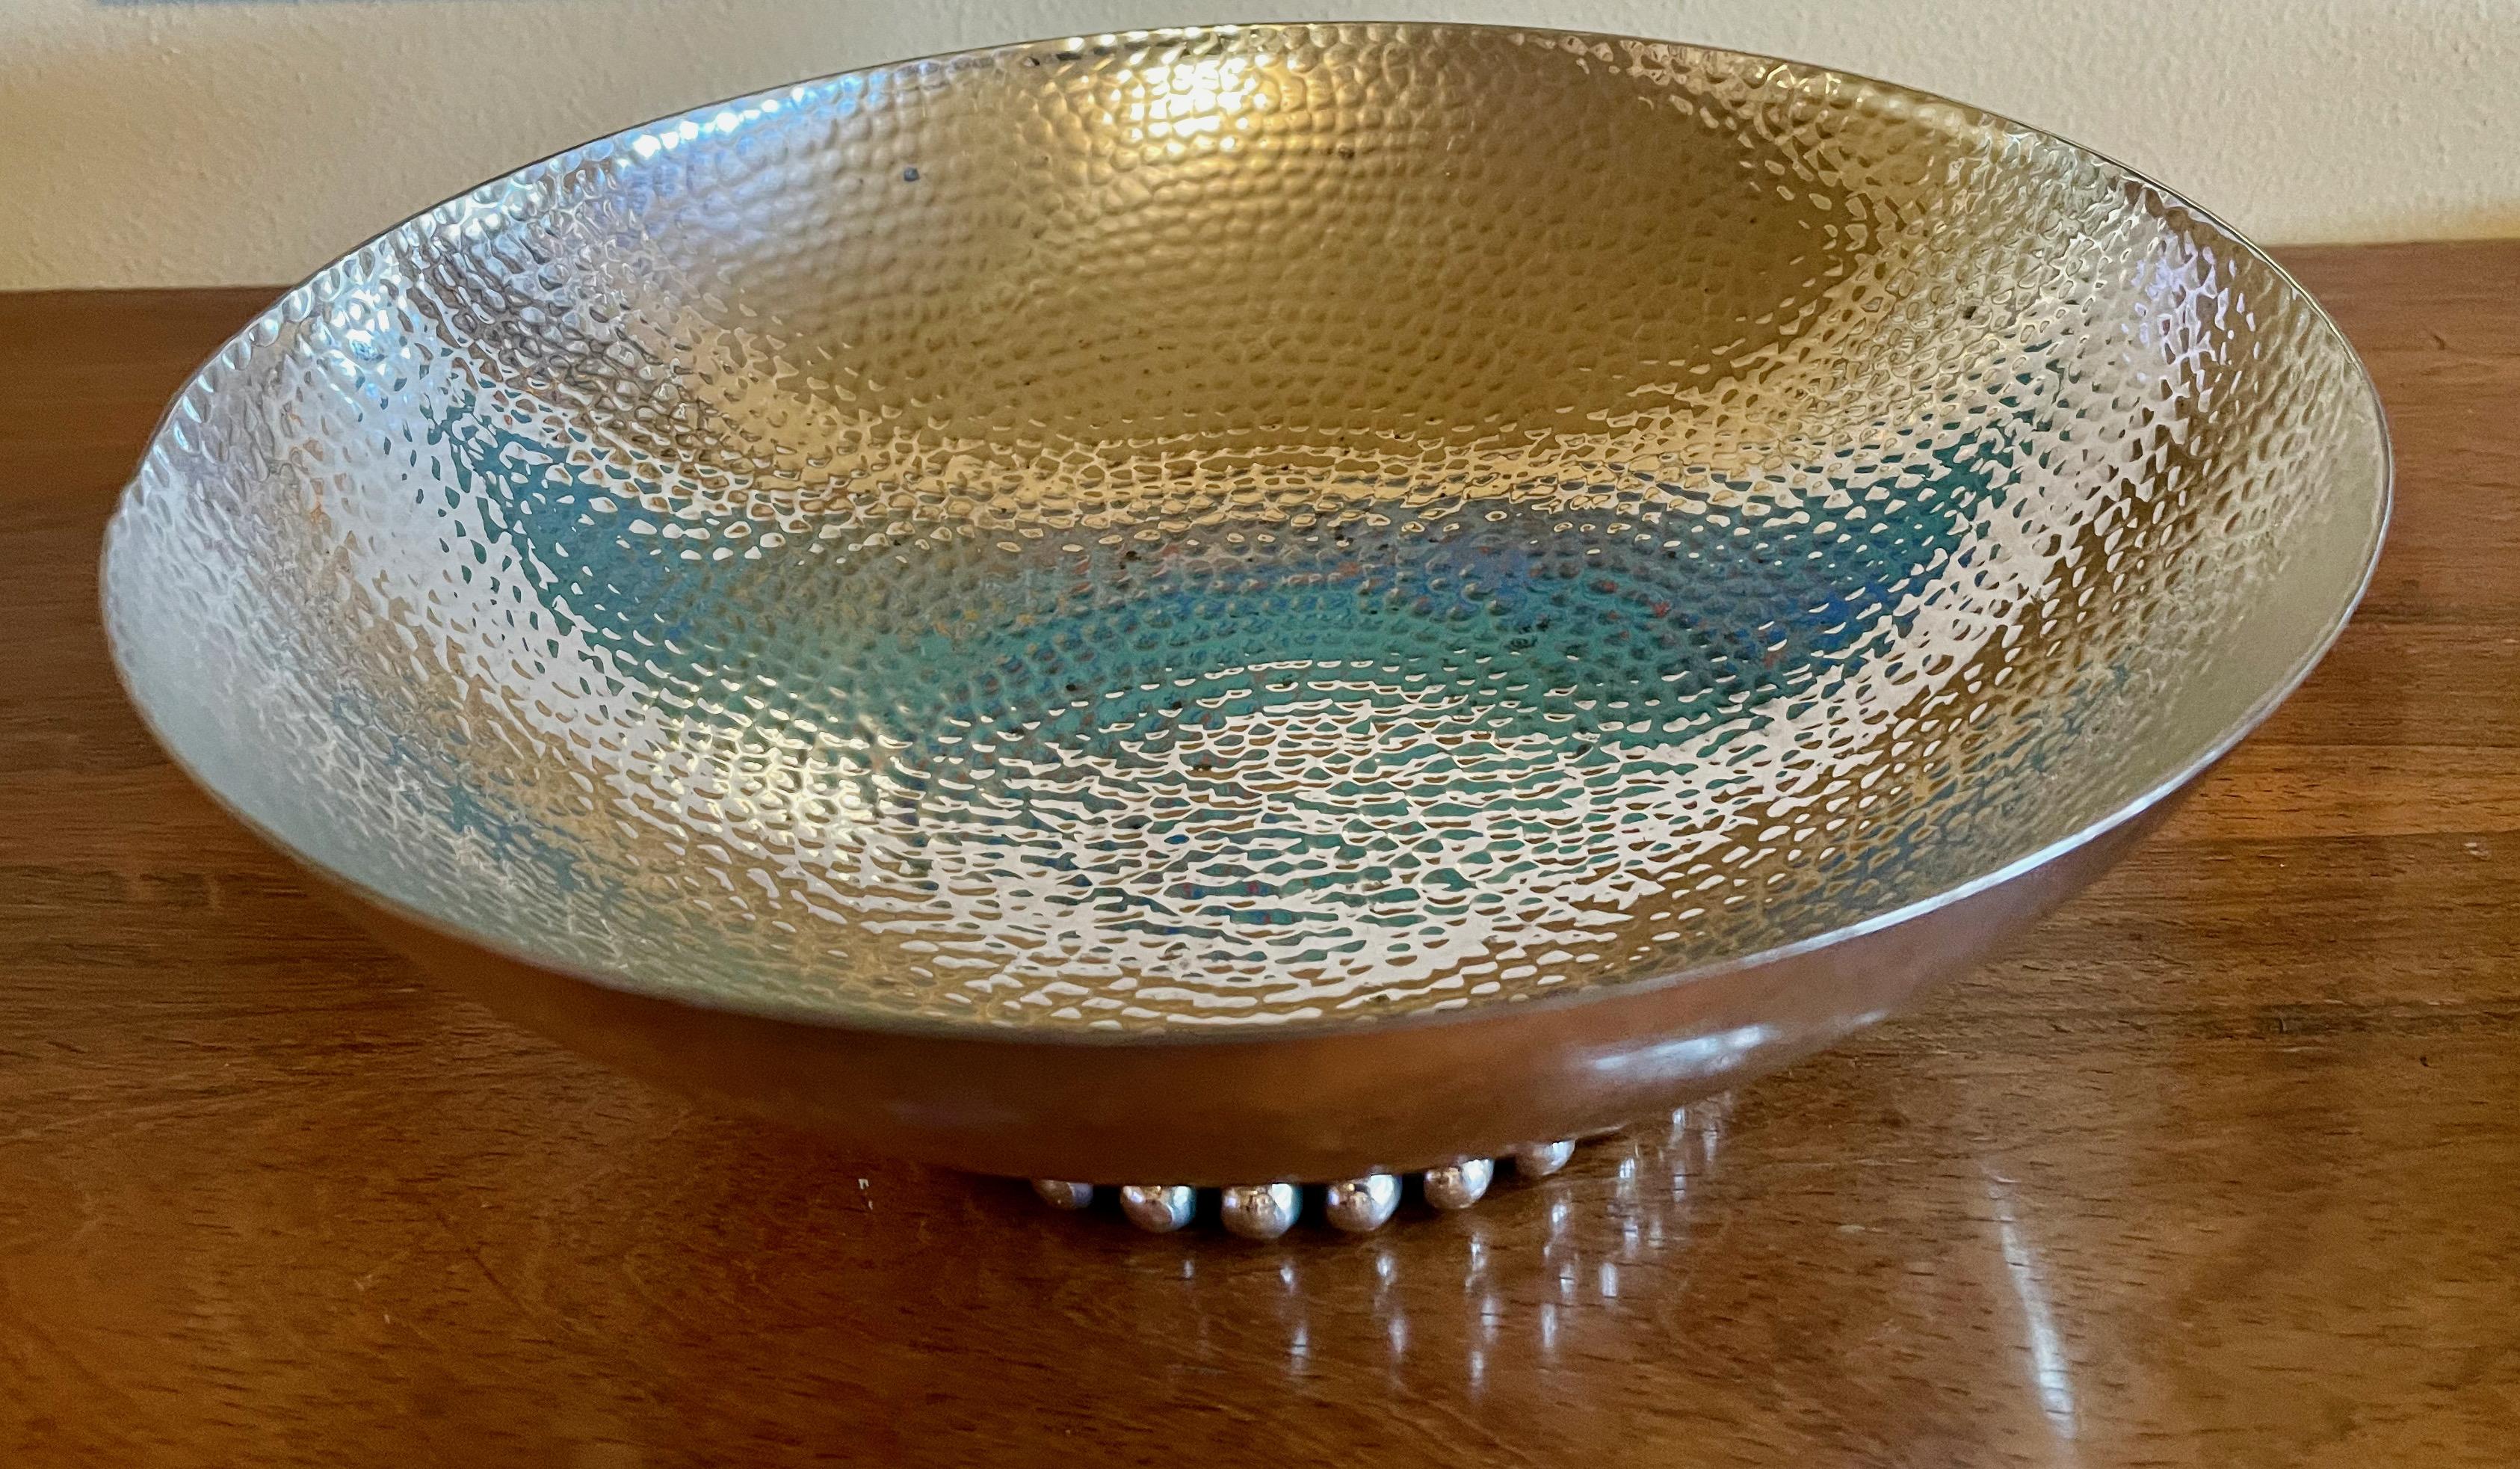 Jean Despres important French designer, known for original jewelry designs, champagne buckets, cocktail shakers, and many fine objects of art. This spectacular bowl may be one-off, with both signature (on the underside of base) and initial stamp on